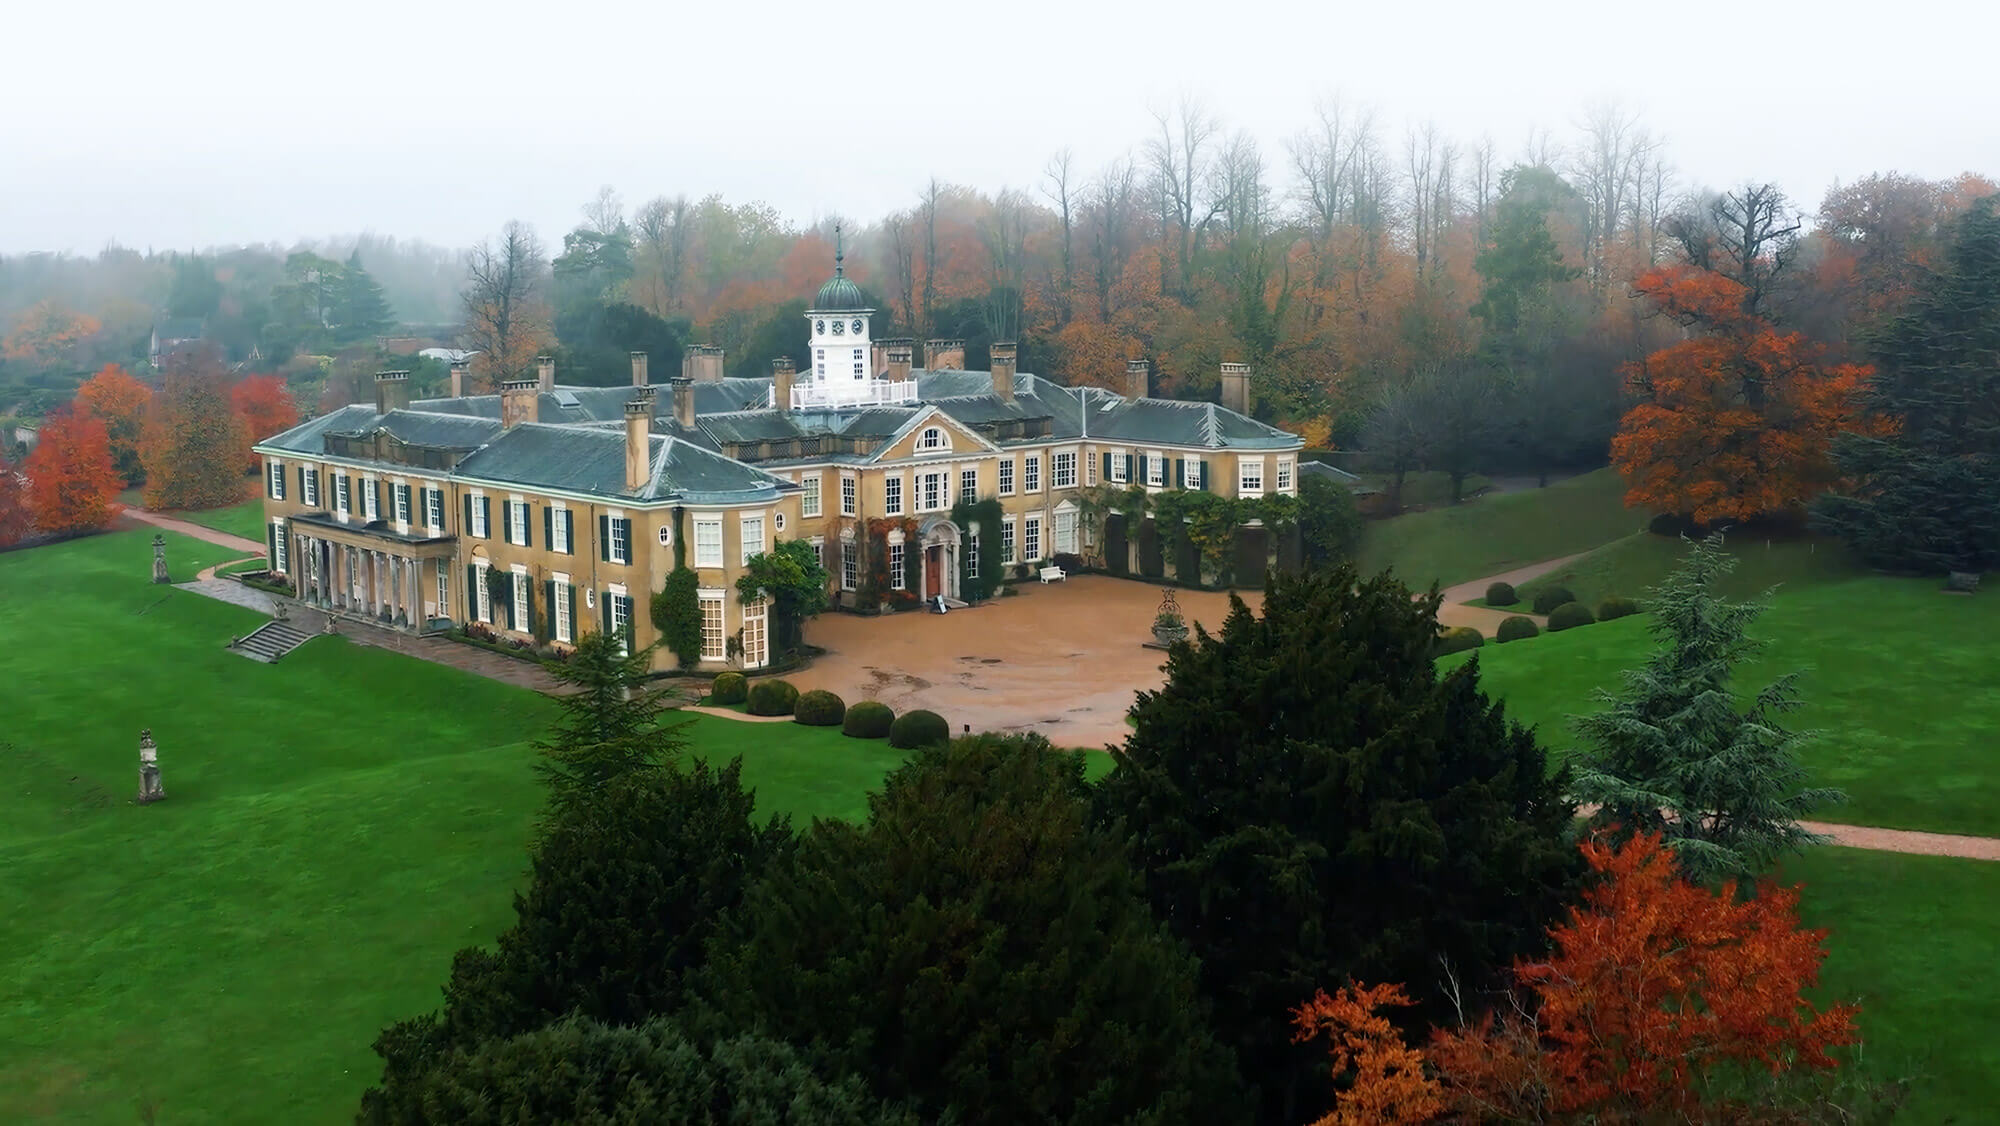 An aerial drone shot of National Trust site Polsden Lacey, from the Rise Media case studies archive